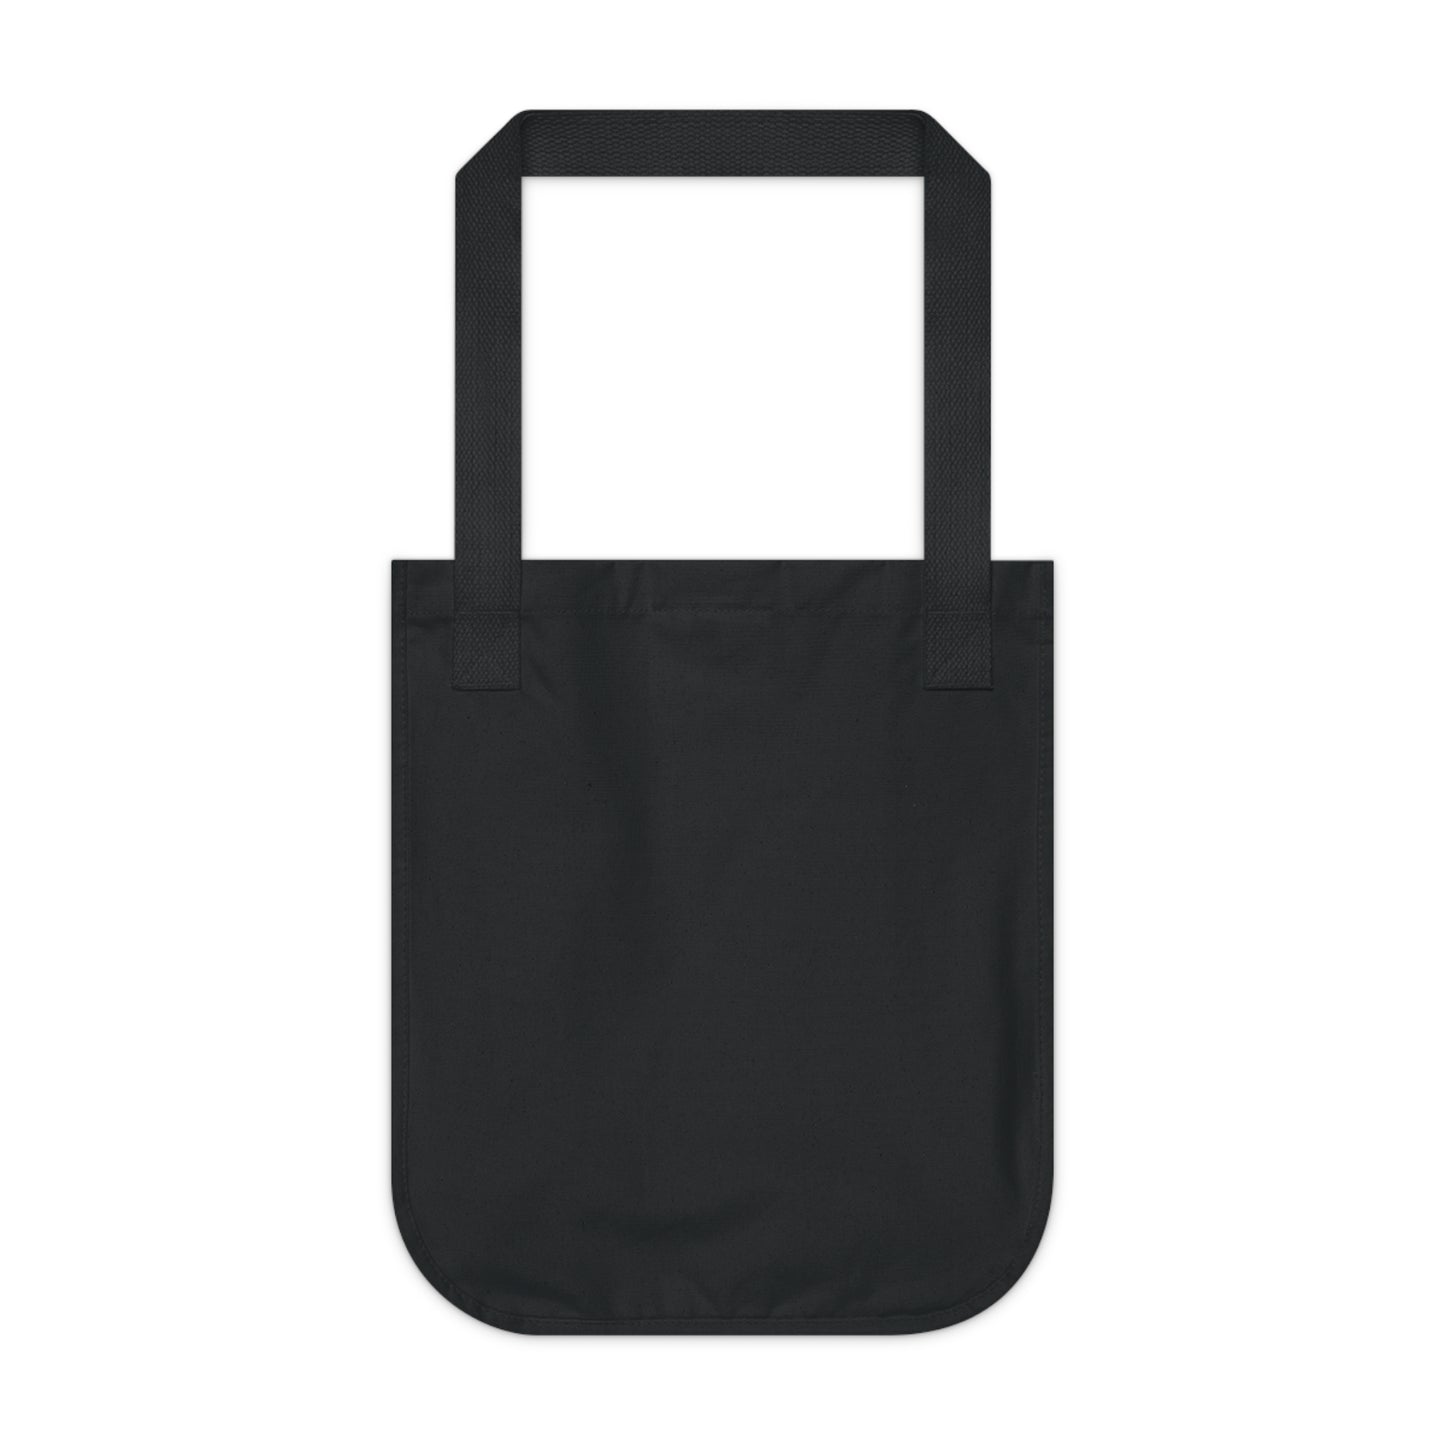 "The Intersection of Humanity and Nature" - Bam Boo! Lifestyle Eco-friendly Tote Bag